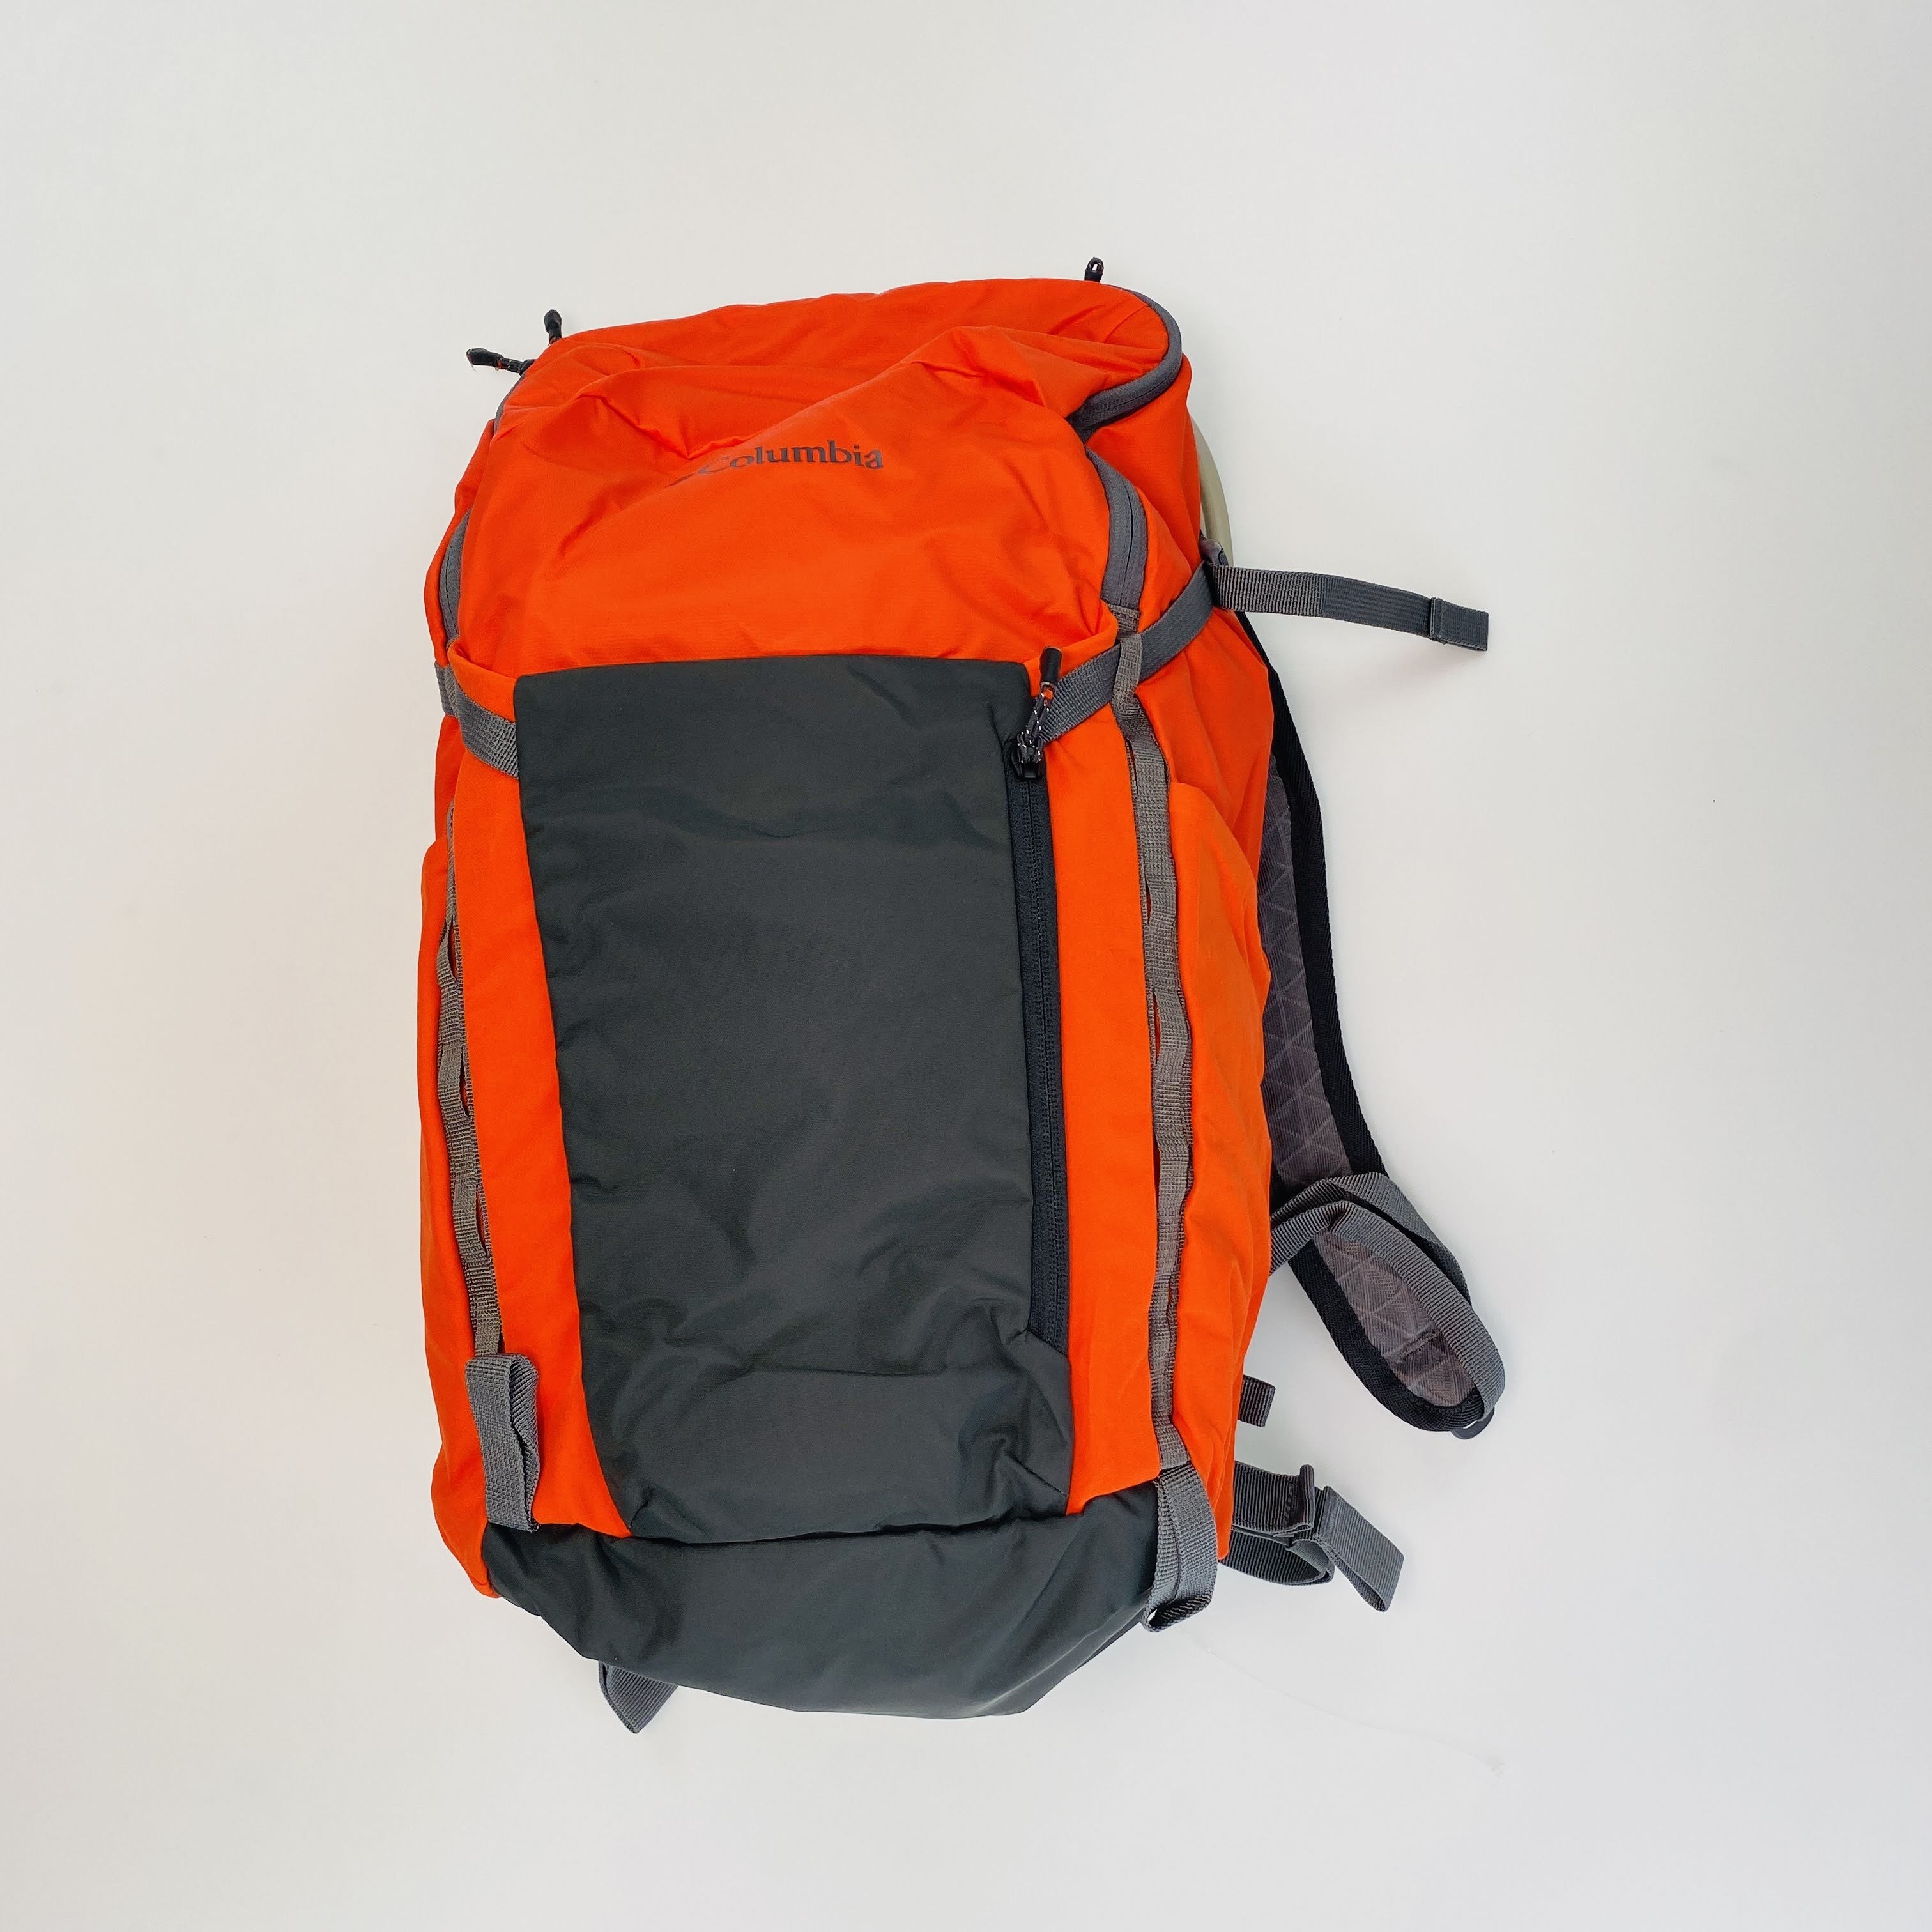 Columbia Maxtrail™ 22L Backpack with Reservoir - Seconde main Sac à dos d'hydratation - Rouge - Taille unique | Hardloop